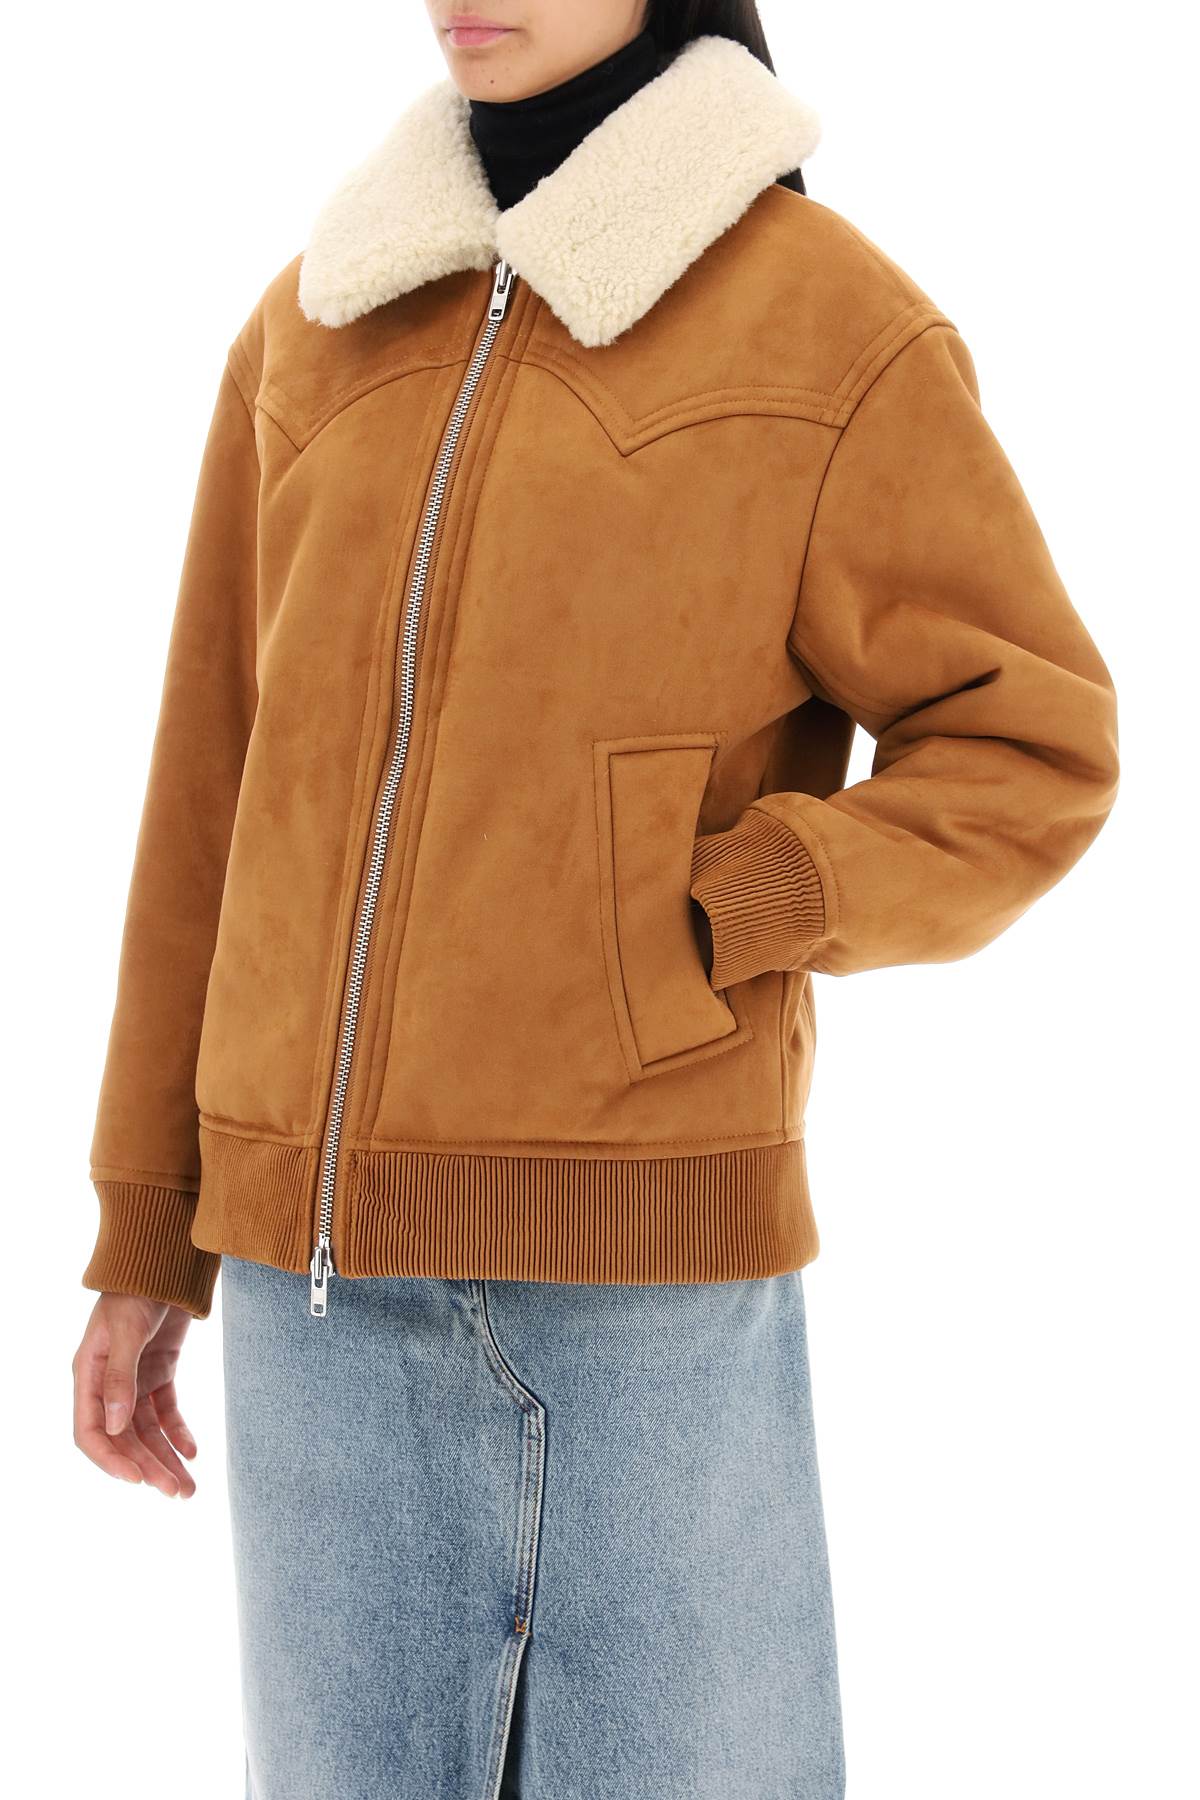 Stand studio lillee eco-shearling bomber jacket-3